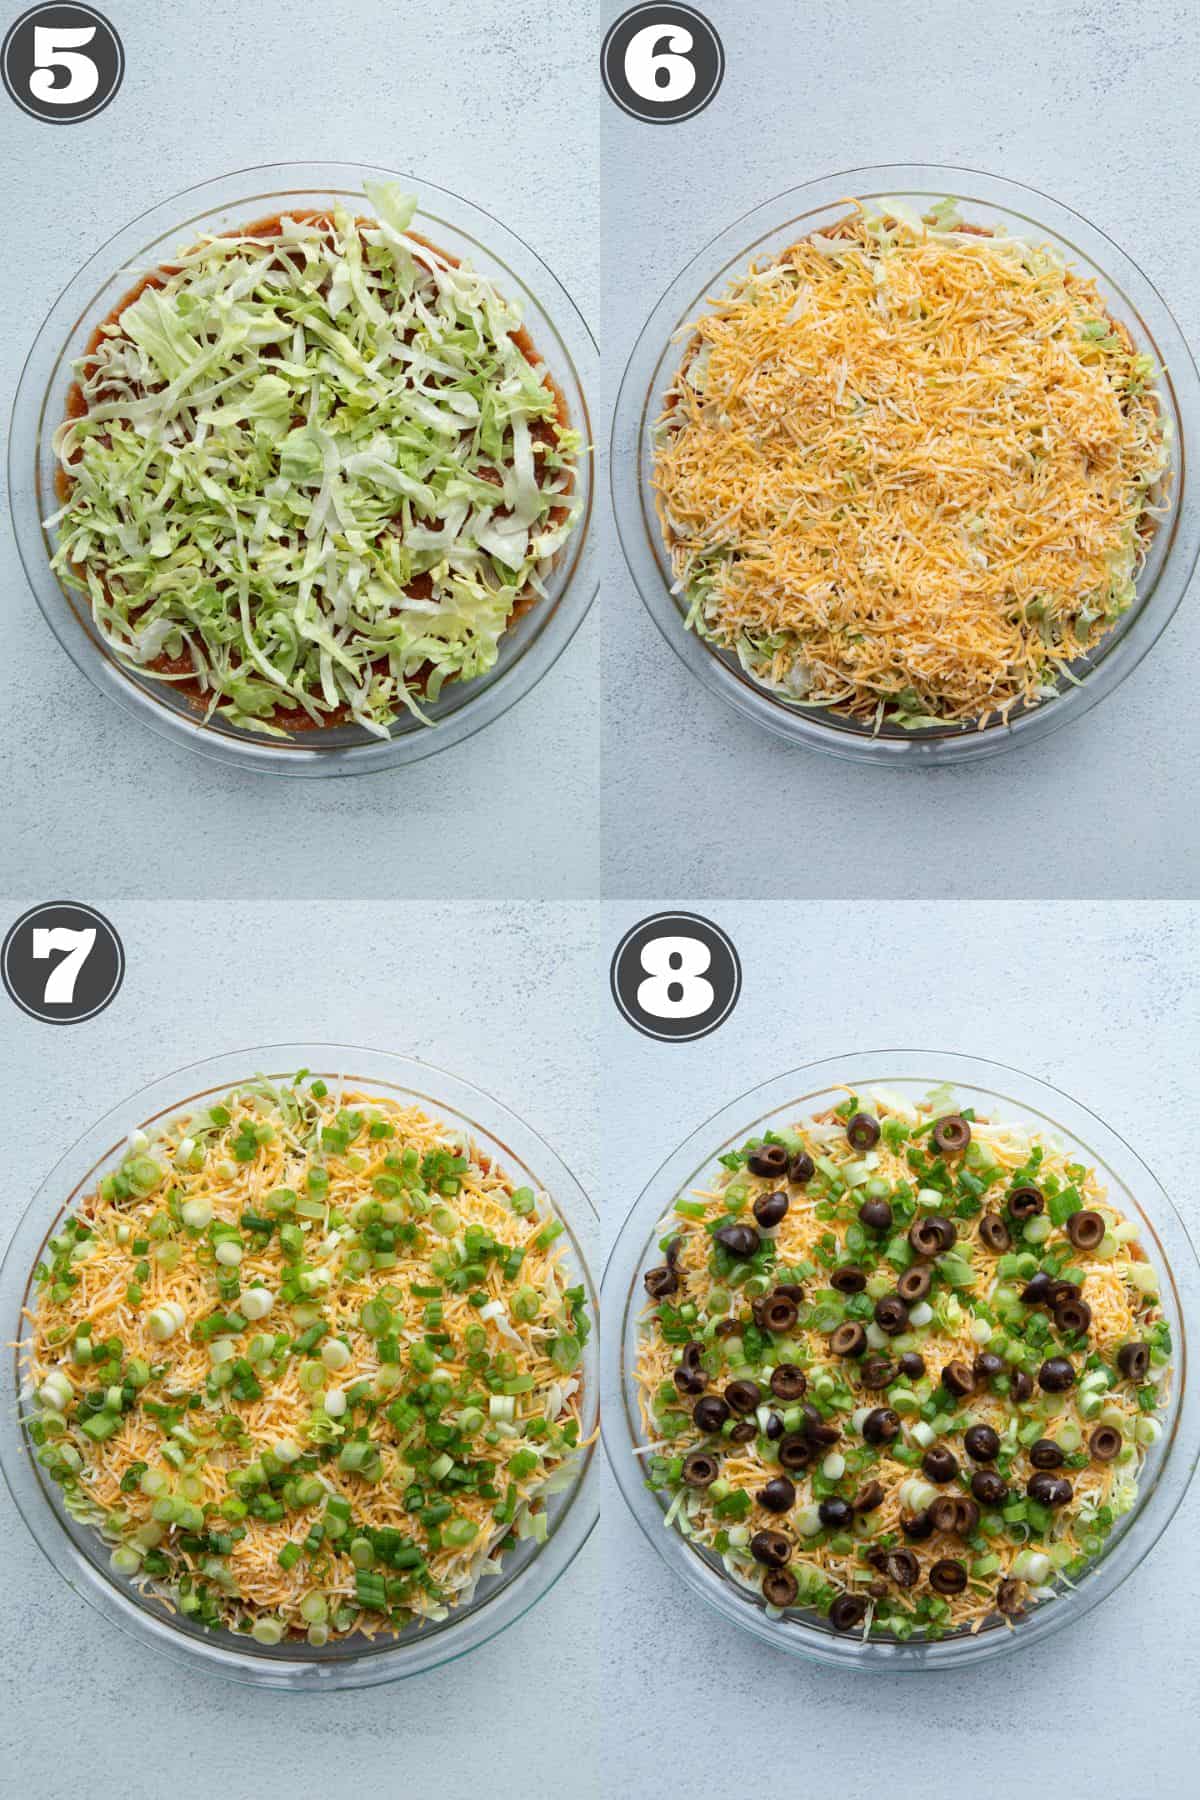 various stages of assembling taco dip with lettuce, cheese, green onions, and black olives.